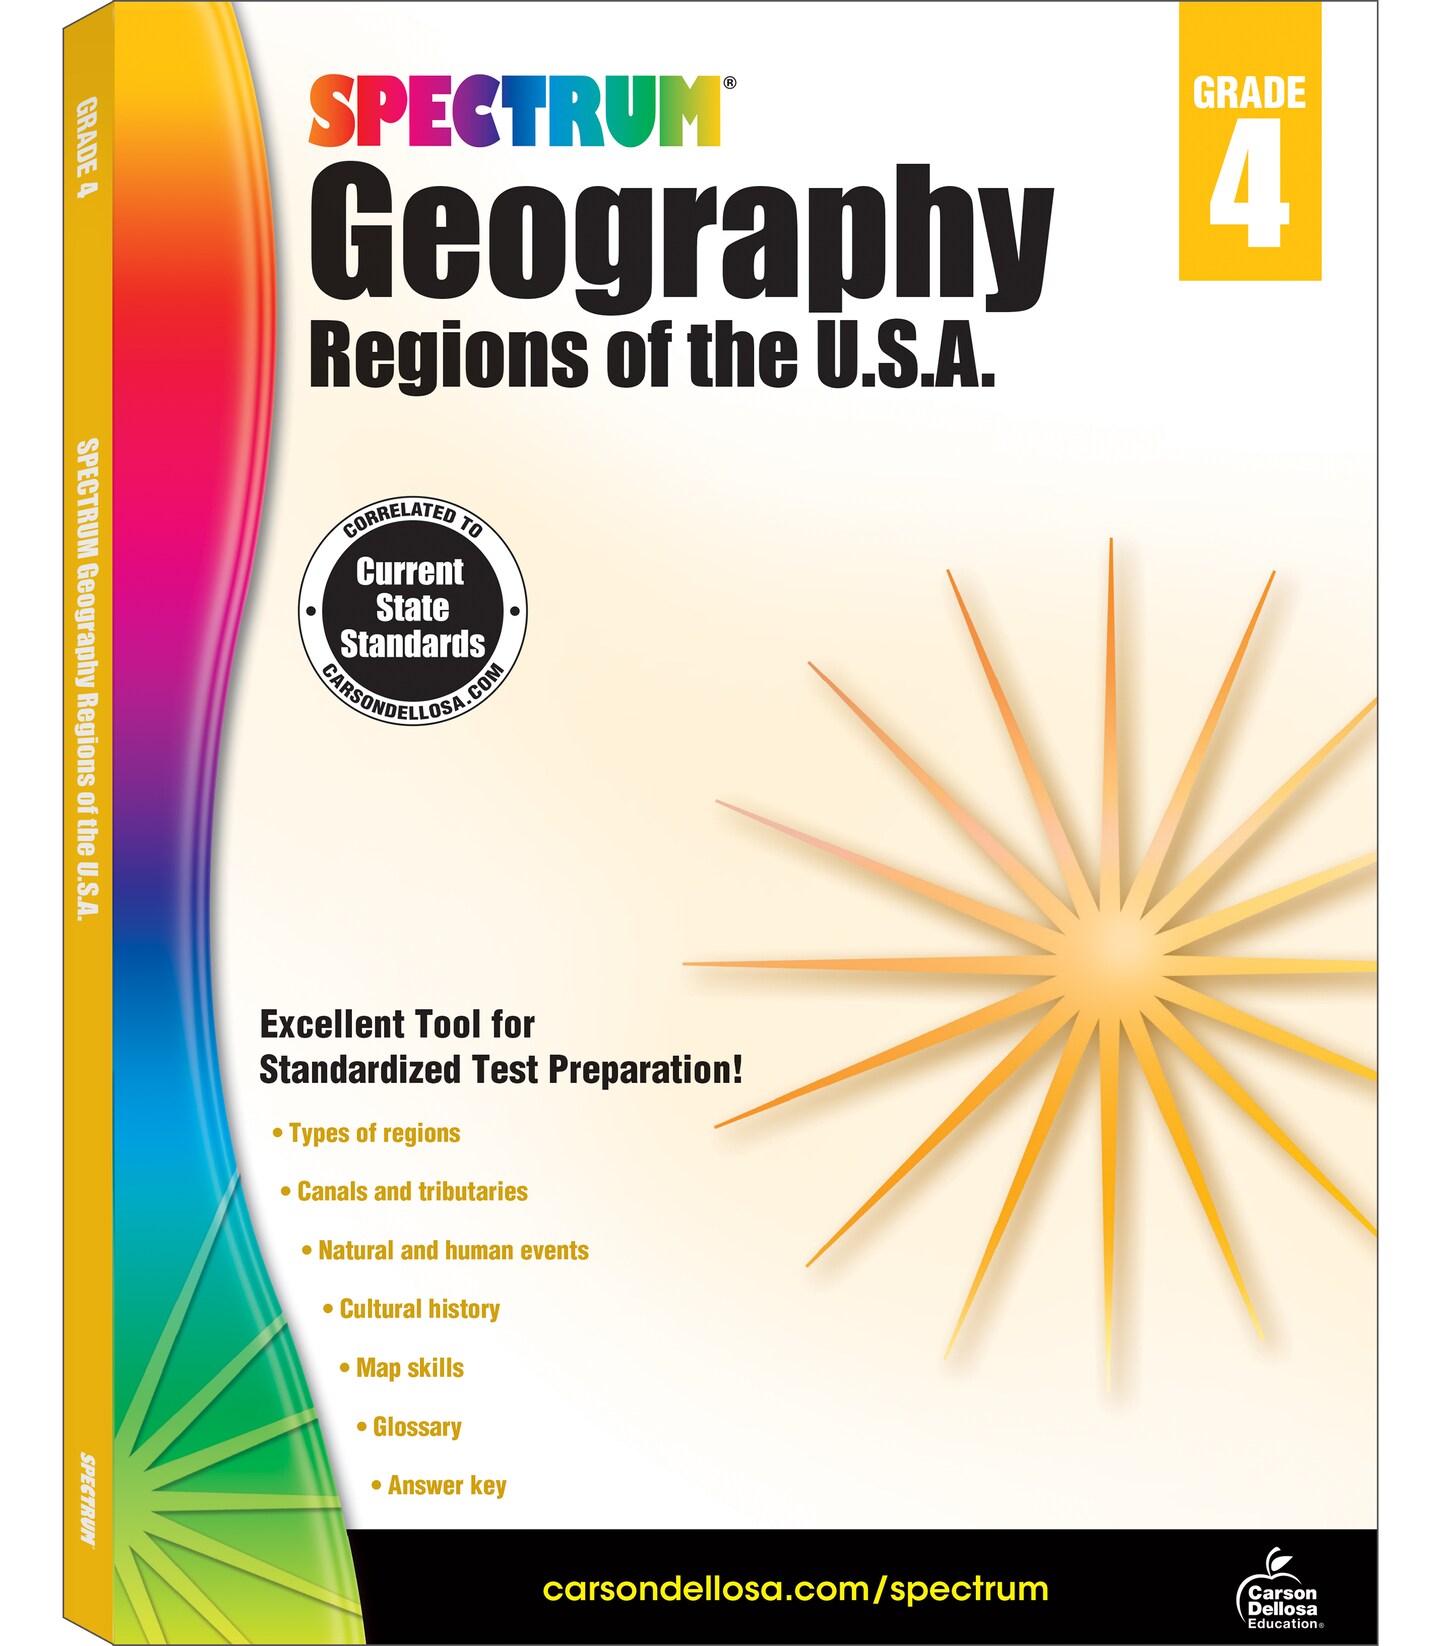 Spectrum Geography 4th Grade Workbook, Ages 9 to 10, Grade 4 Geography Workbook, United States Regions, Cultural and Natural History in America, and US Map Skills - 128 Pages